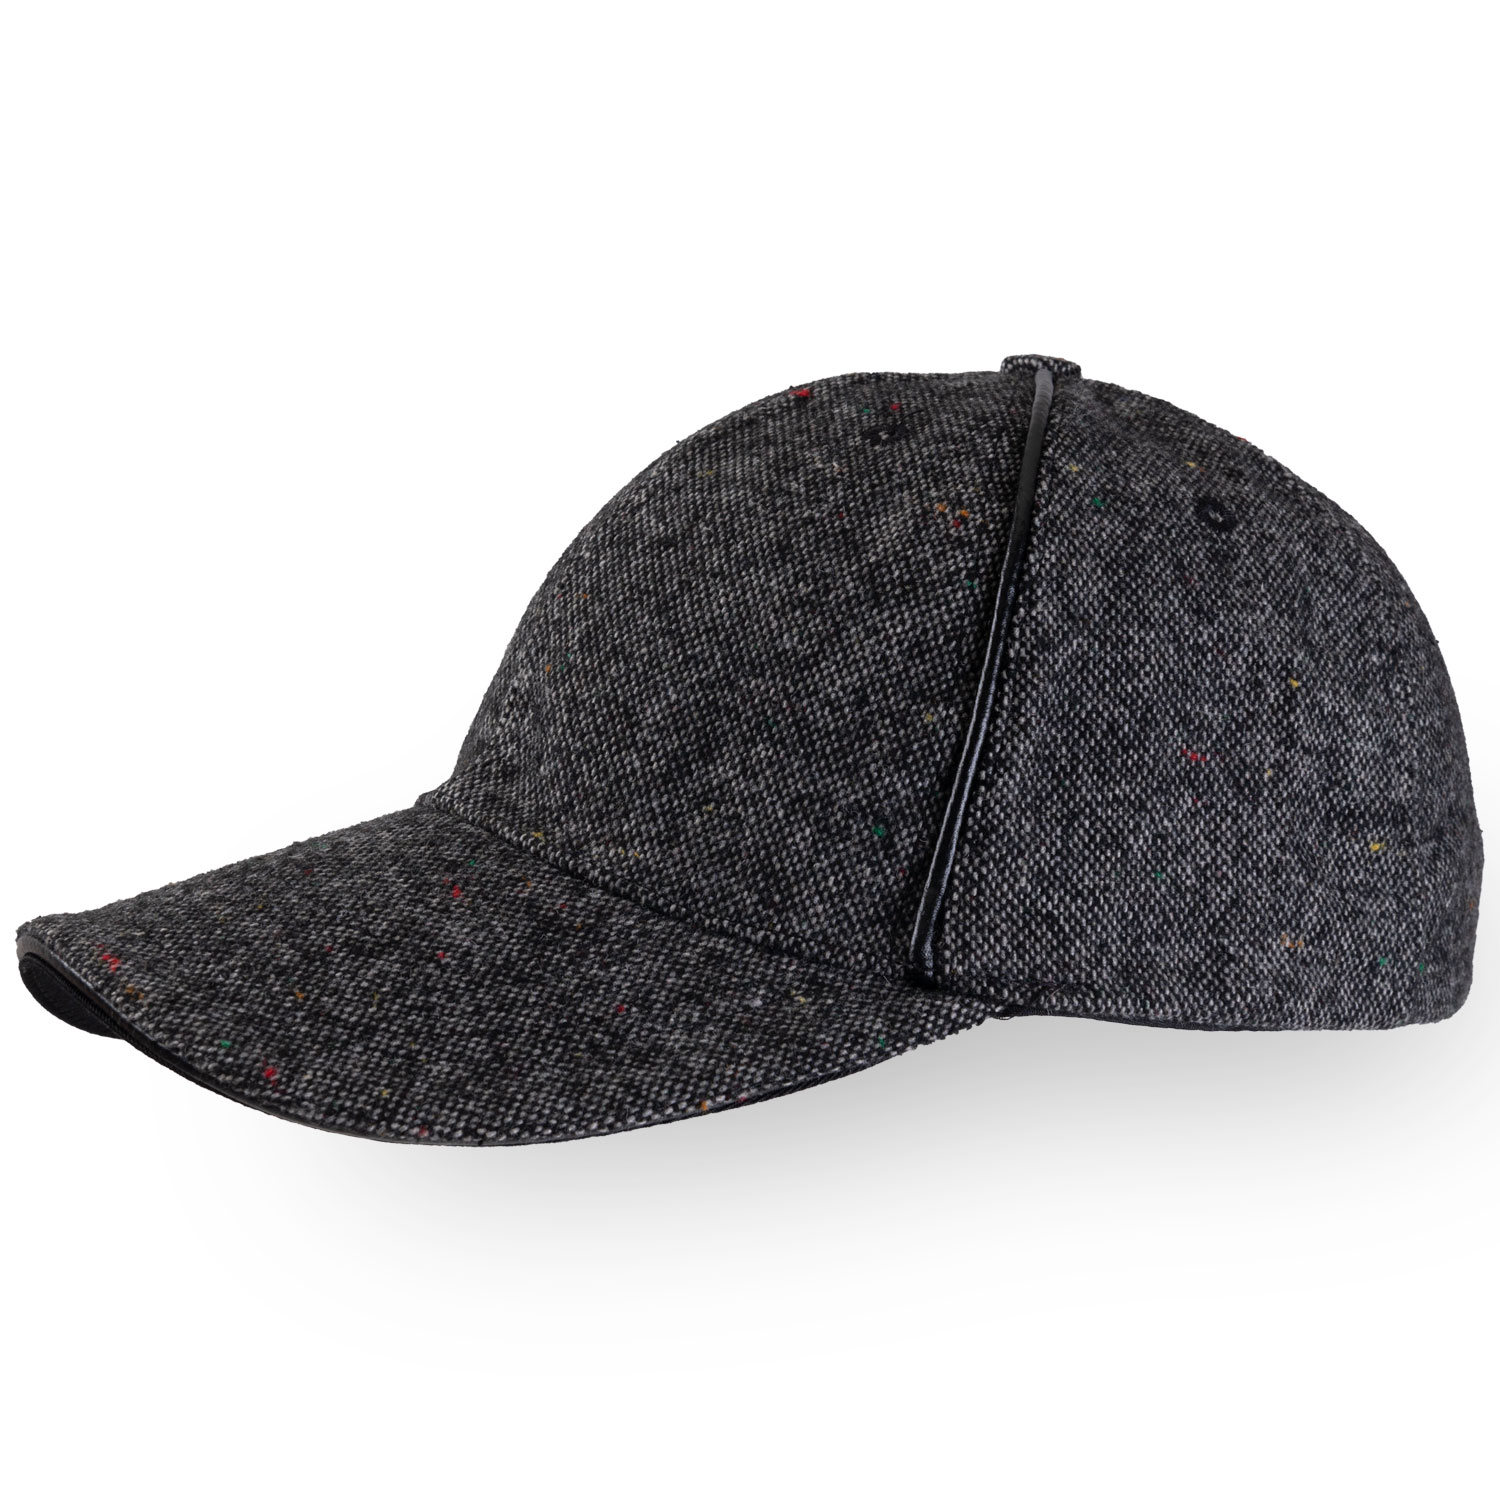 Faux leather-trimmed wool blend tweed baseball cap